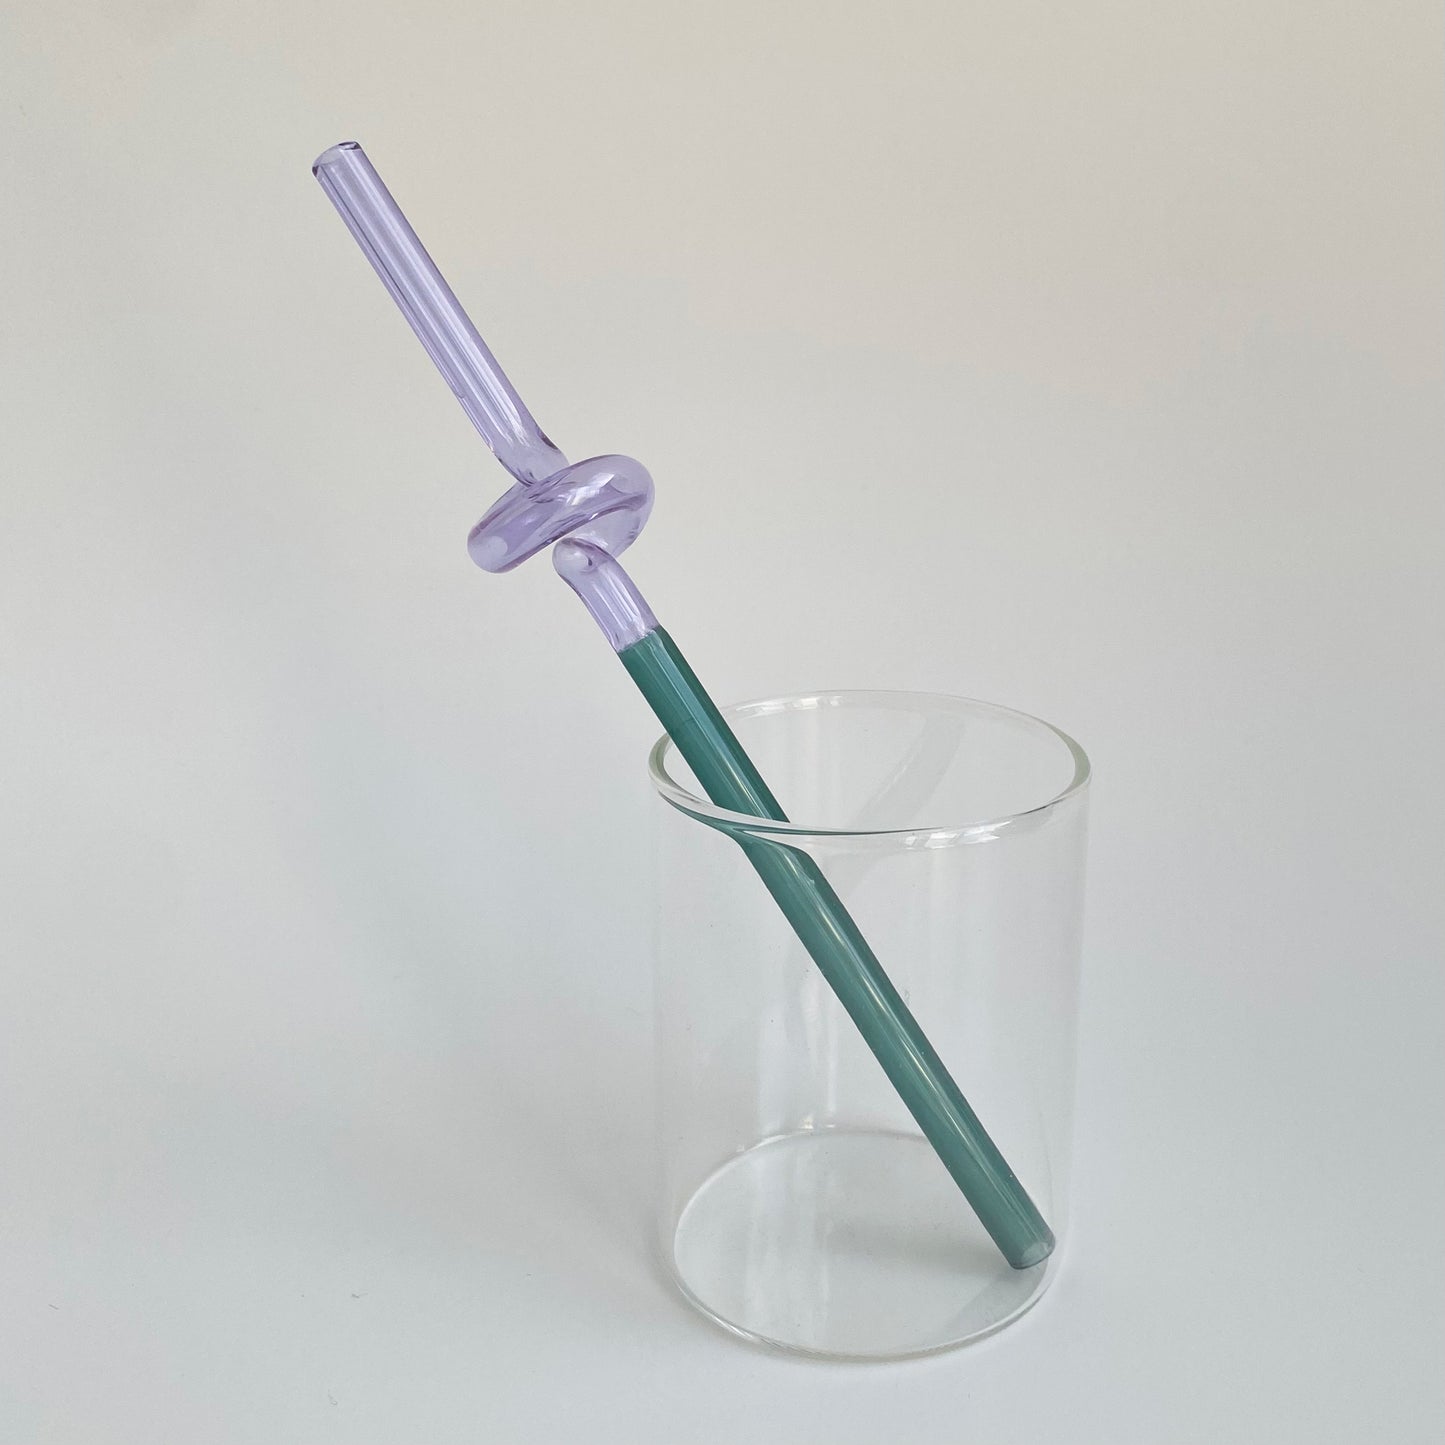 Colorful Spiral & Wavy Glass Straw in blue/purple